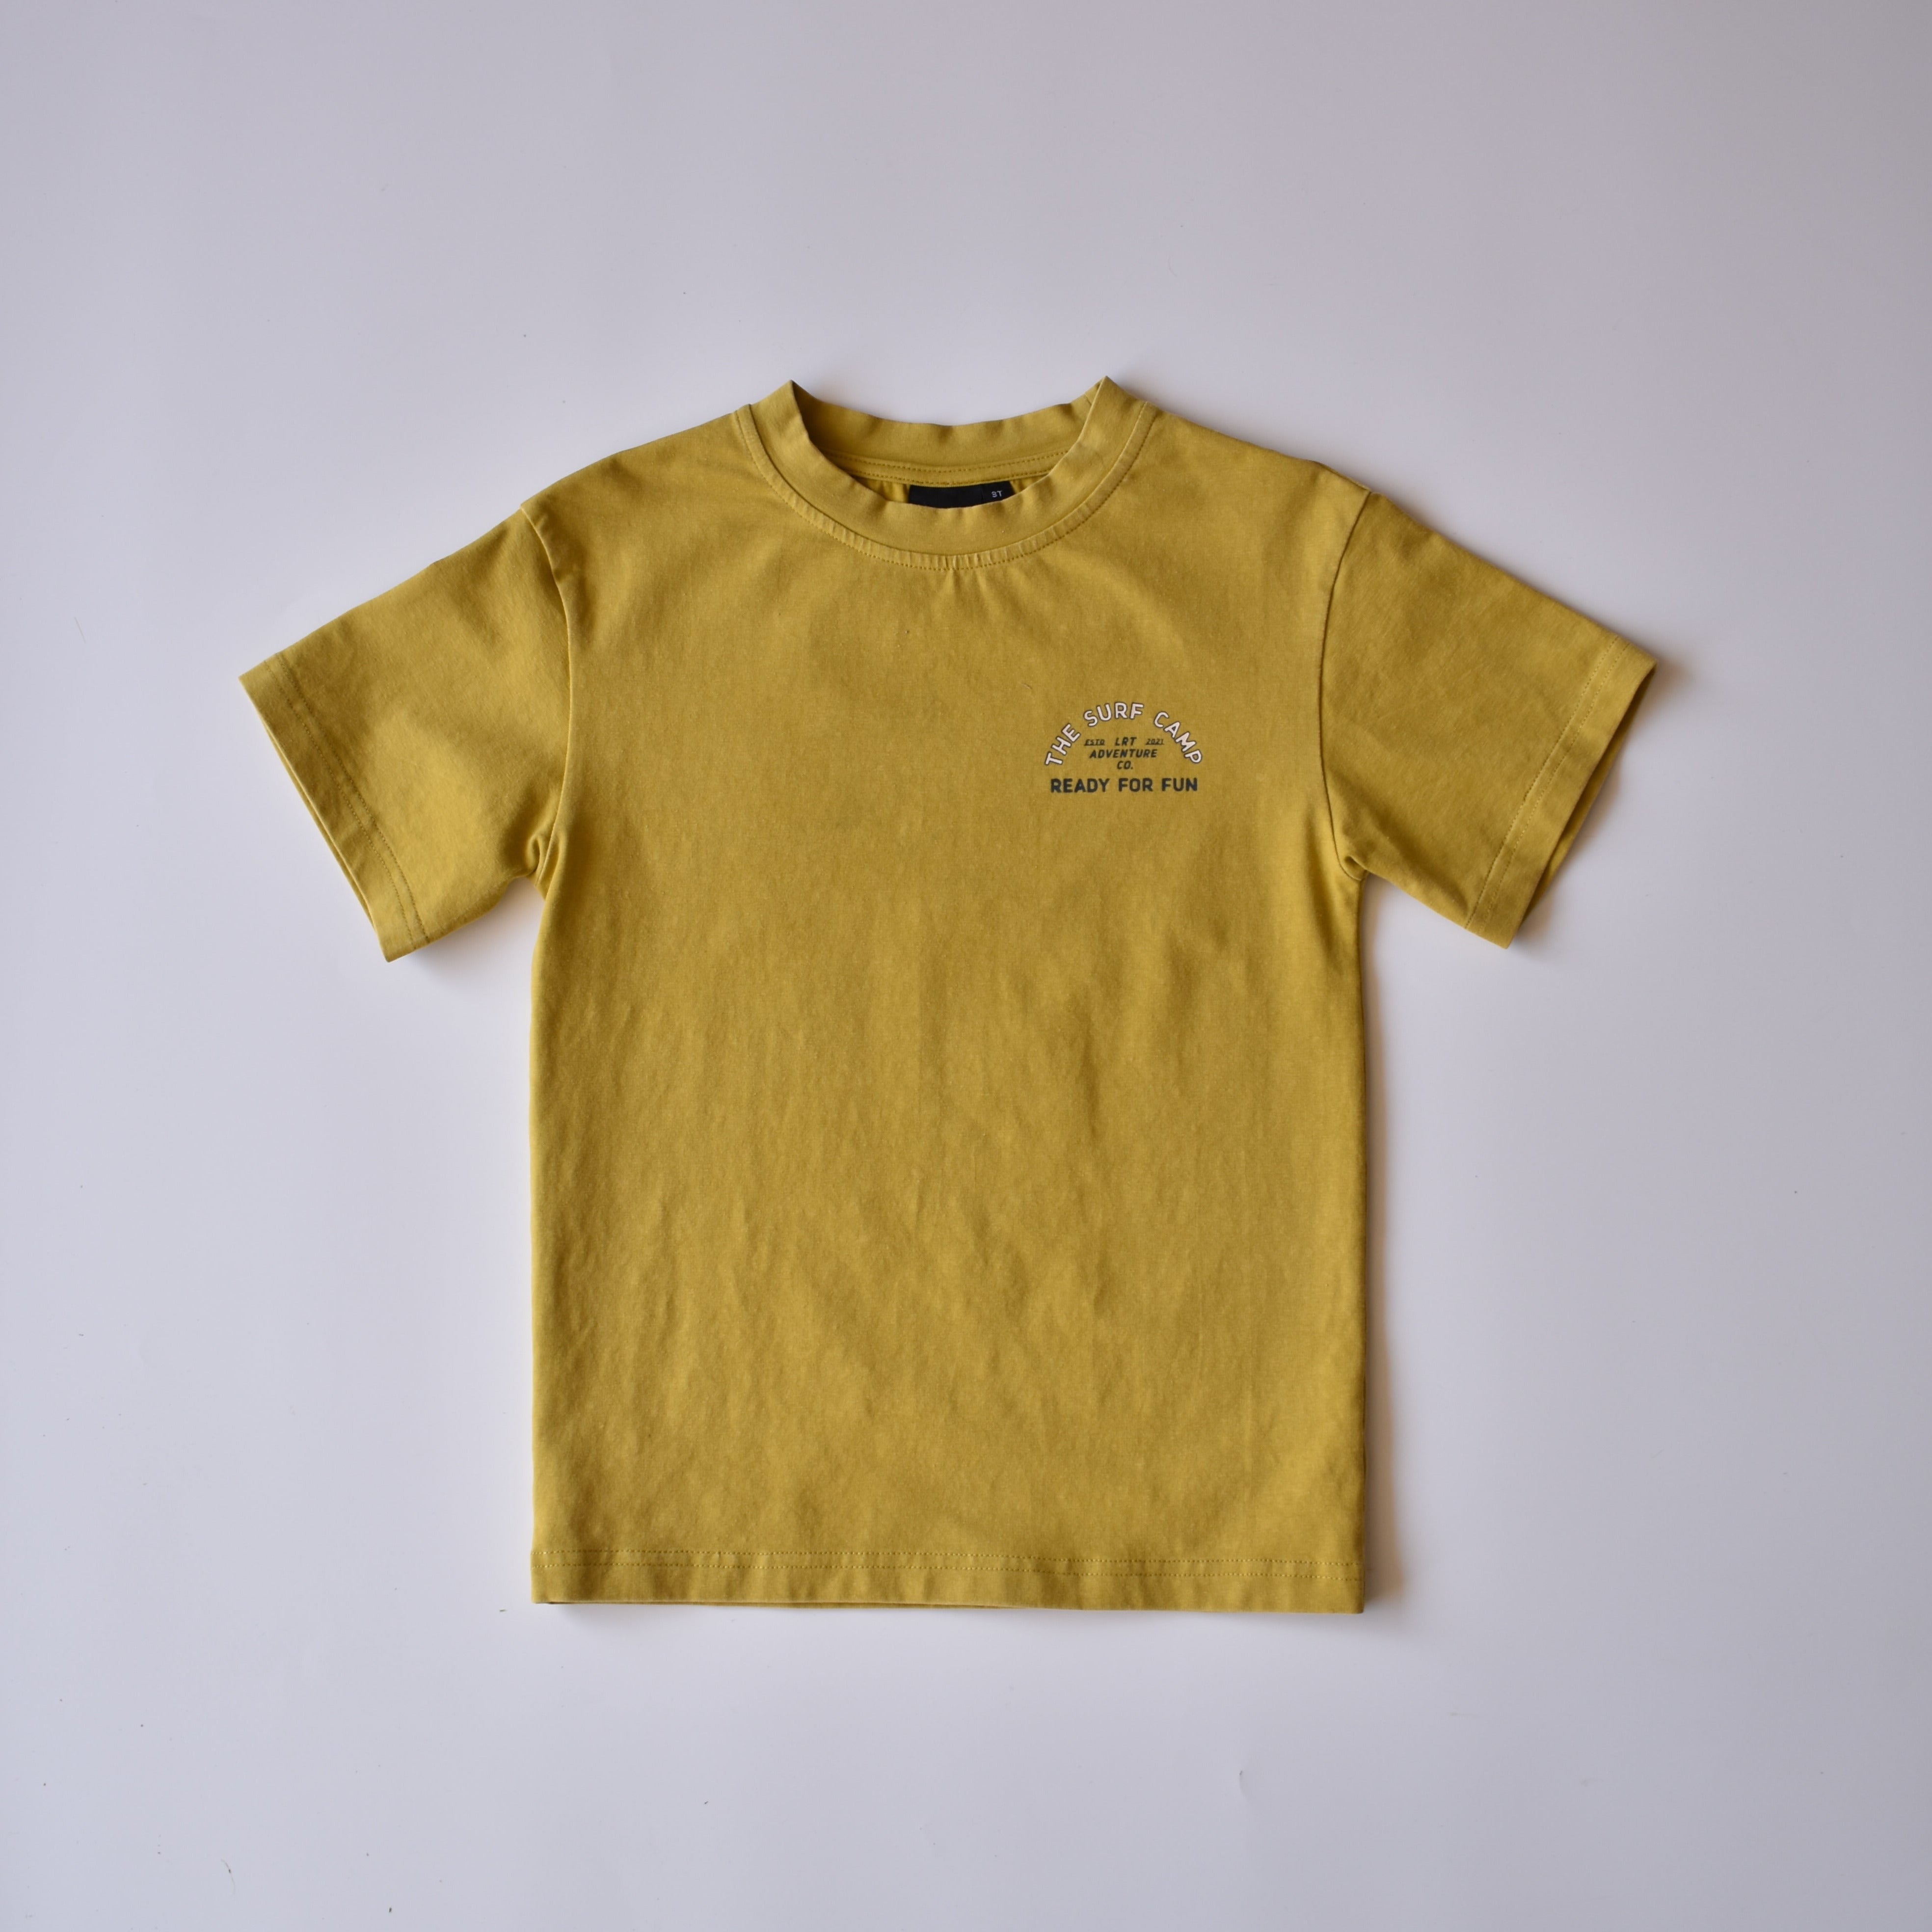 THE GOLD DUST SURF CAMP TEE